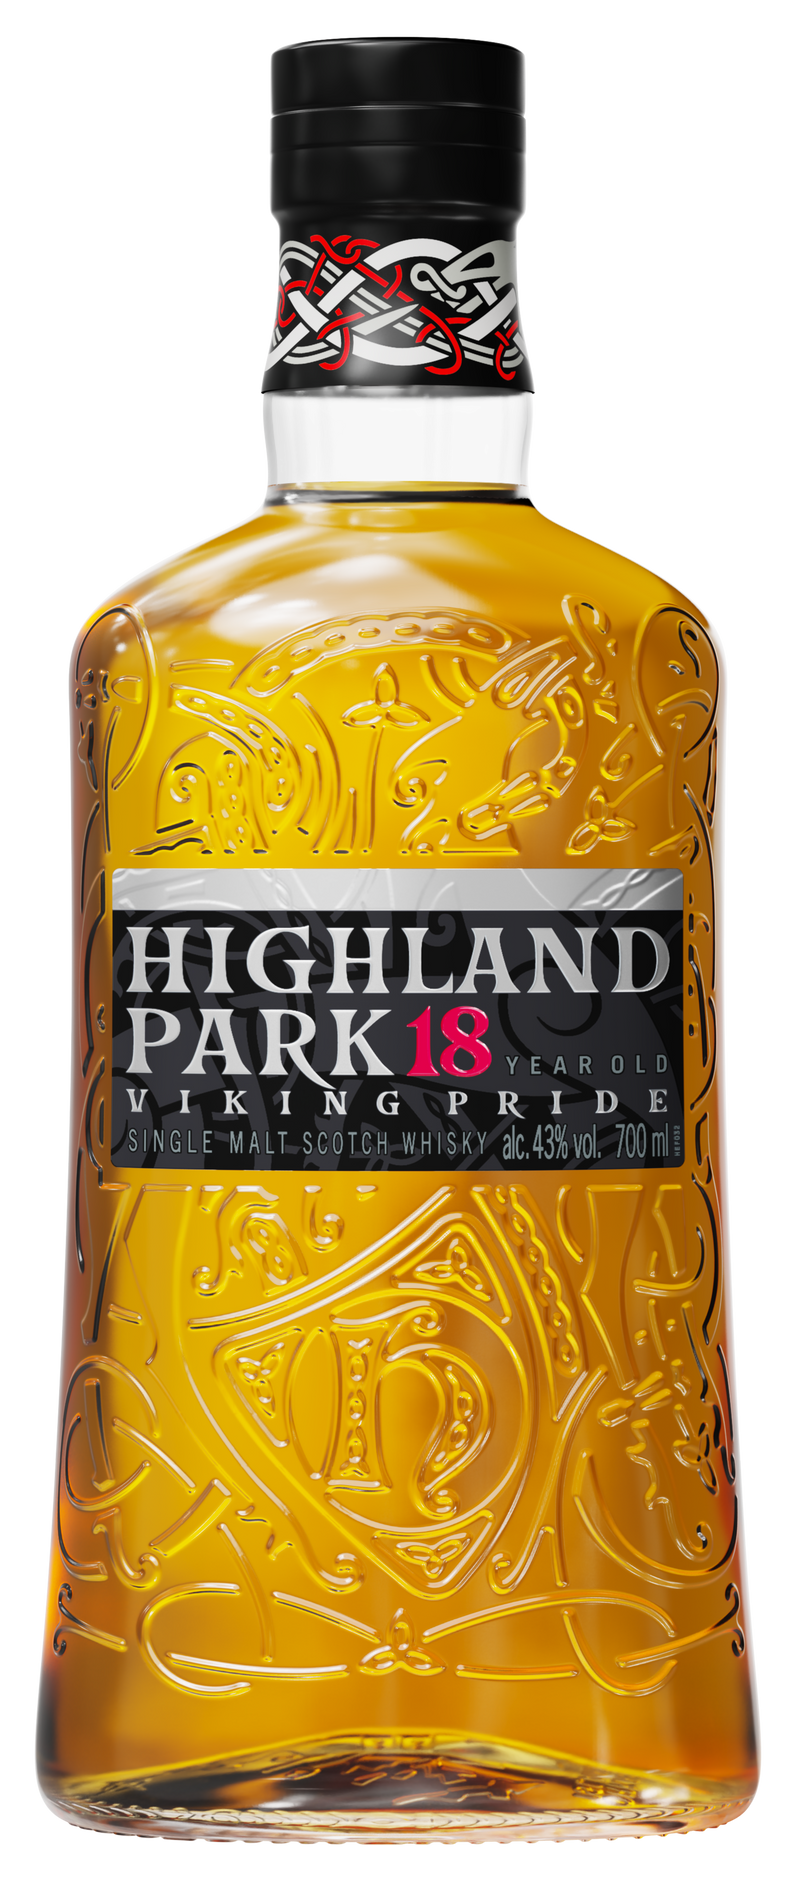 Highland Park 18 Year Old Whisky 70cl